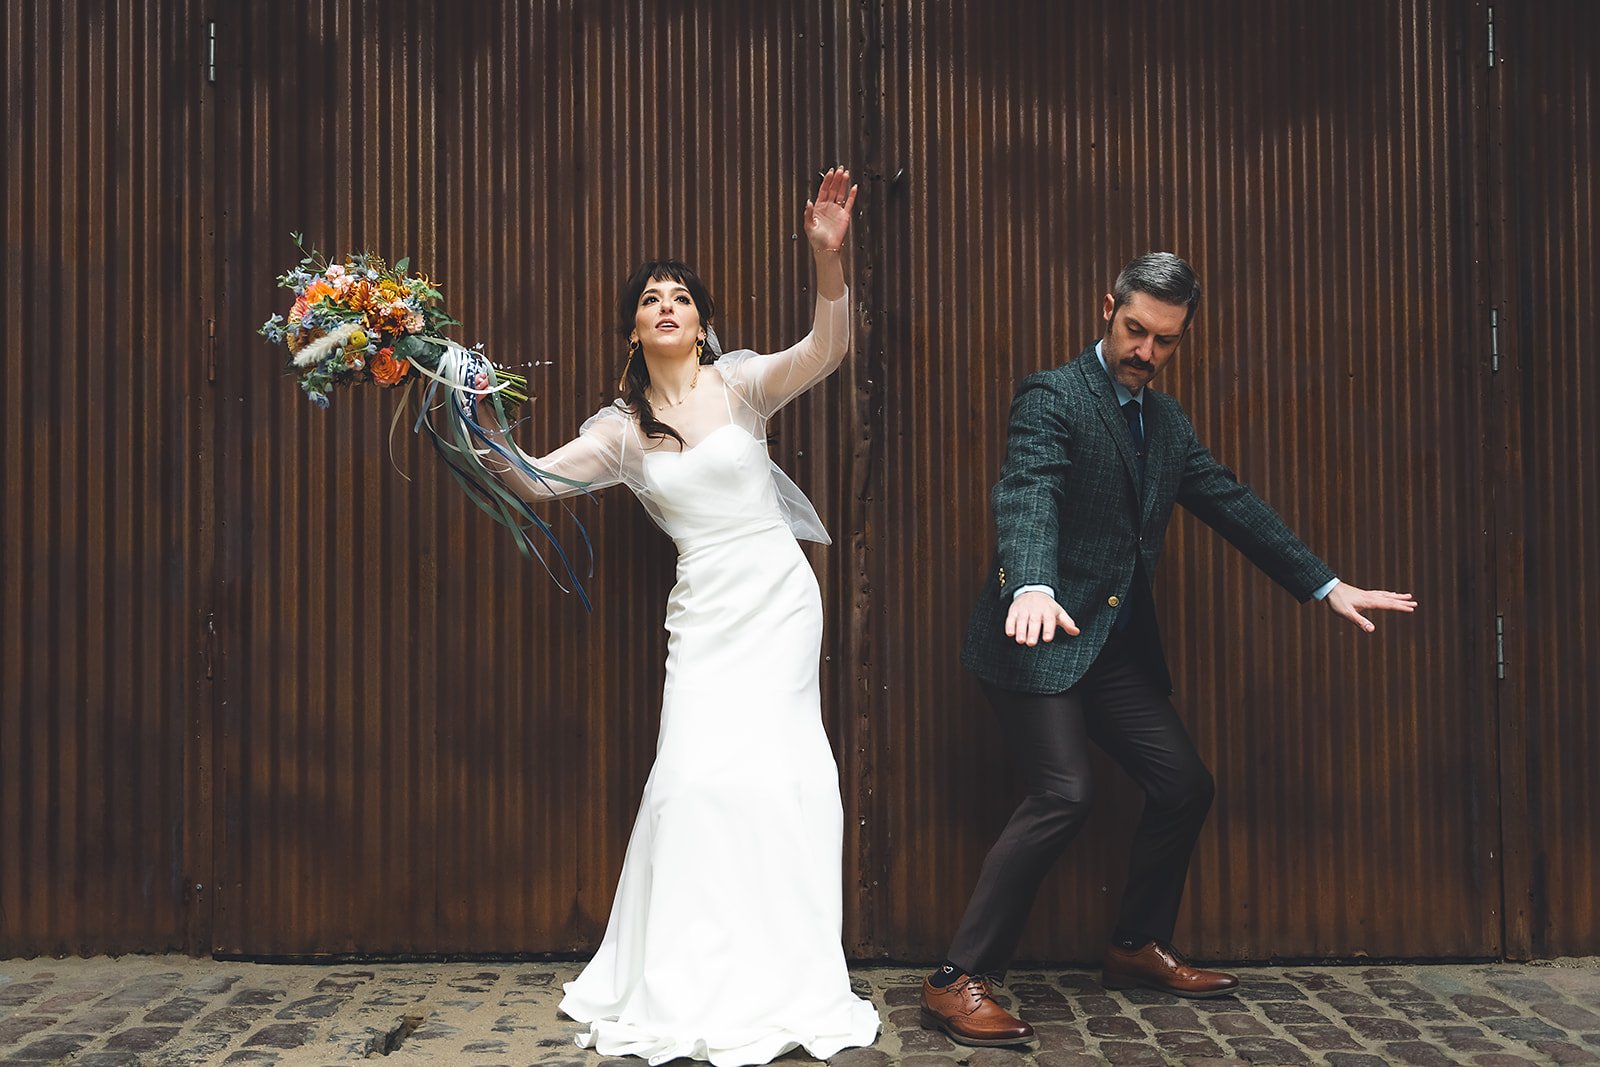  Quirky, Unique, offbeat wedding photography. Bride and Groom dancing like Netflix’s Wednesday 